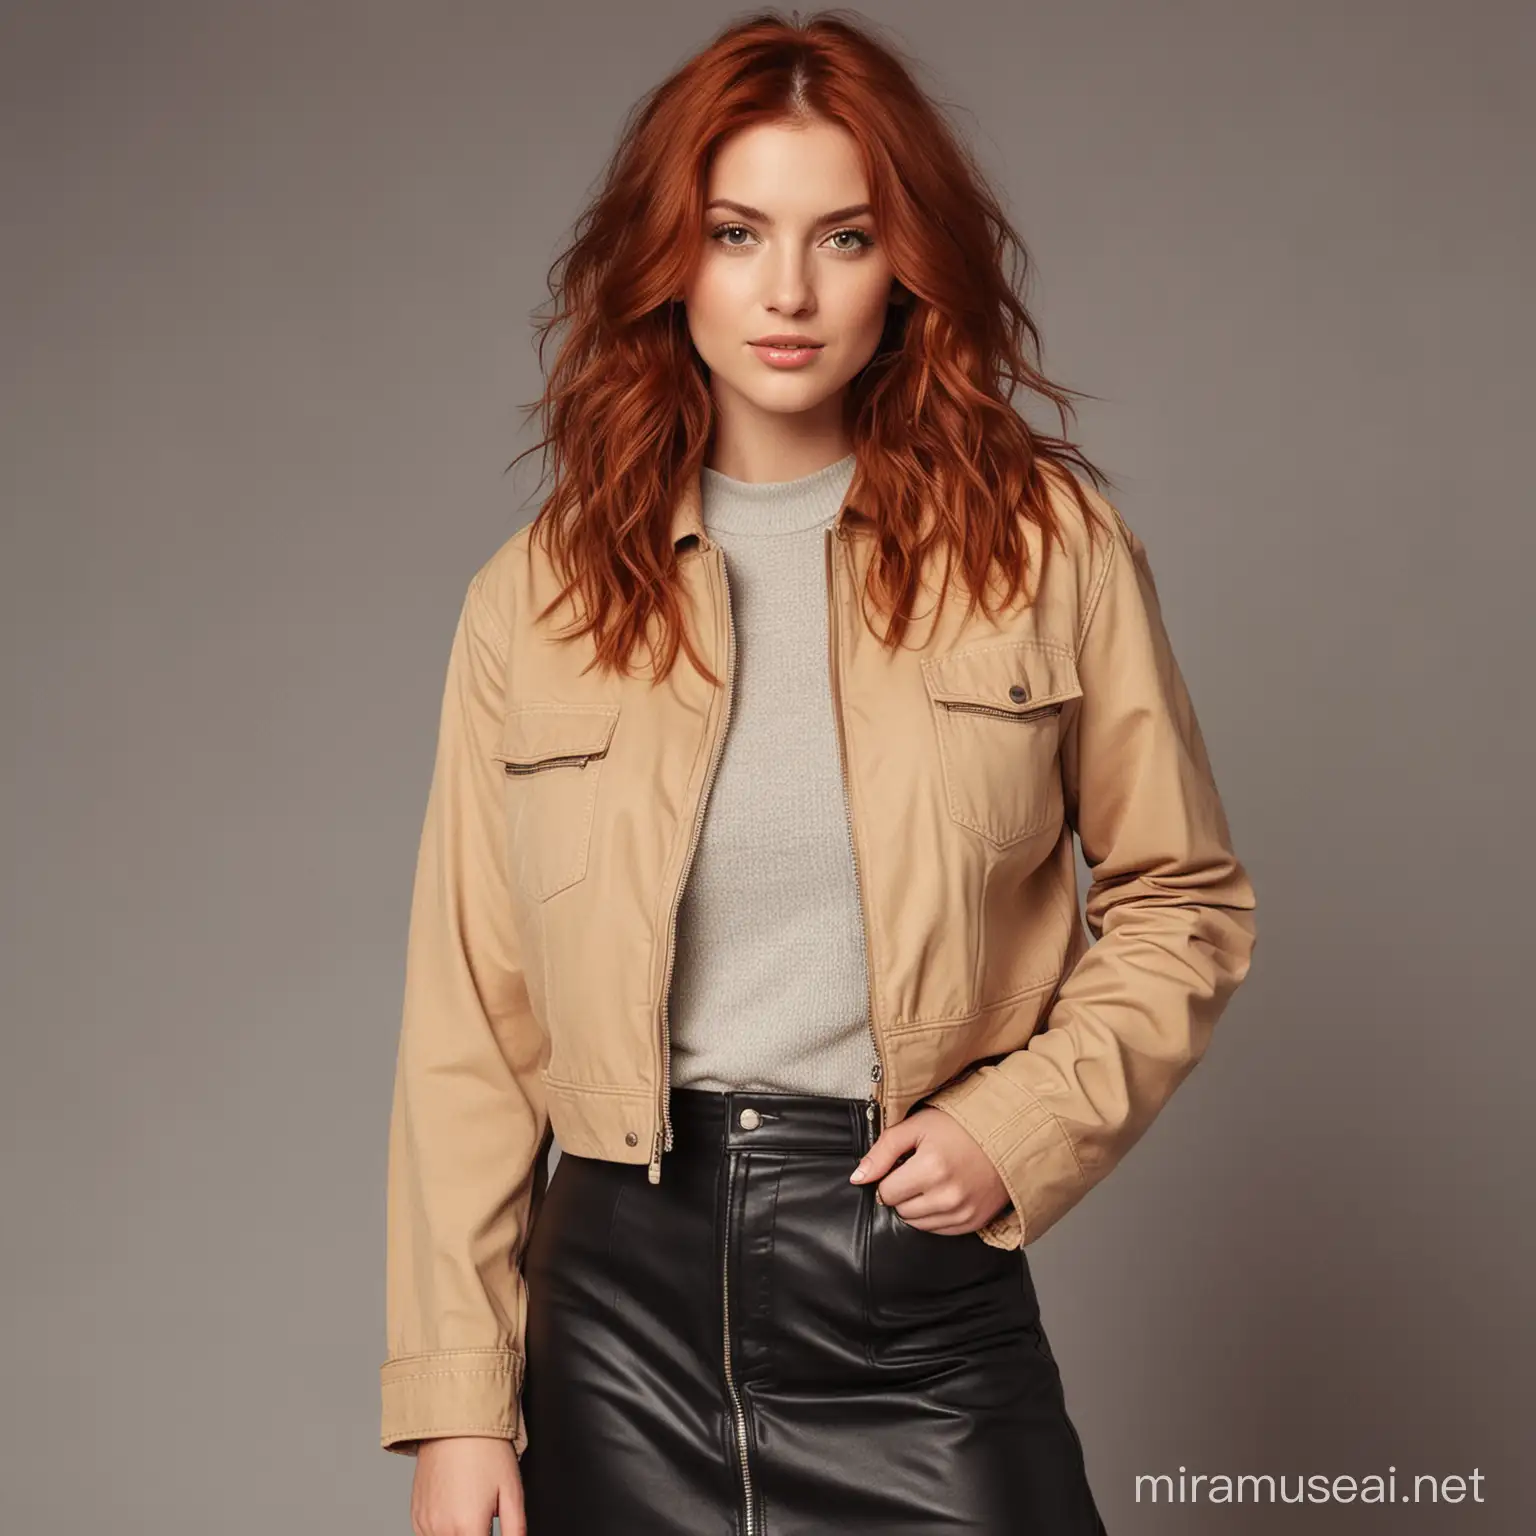 Young Woman with Red Hair in Stylish Urban Outfit